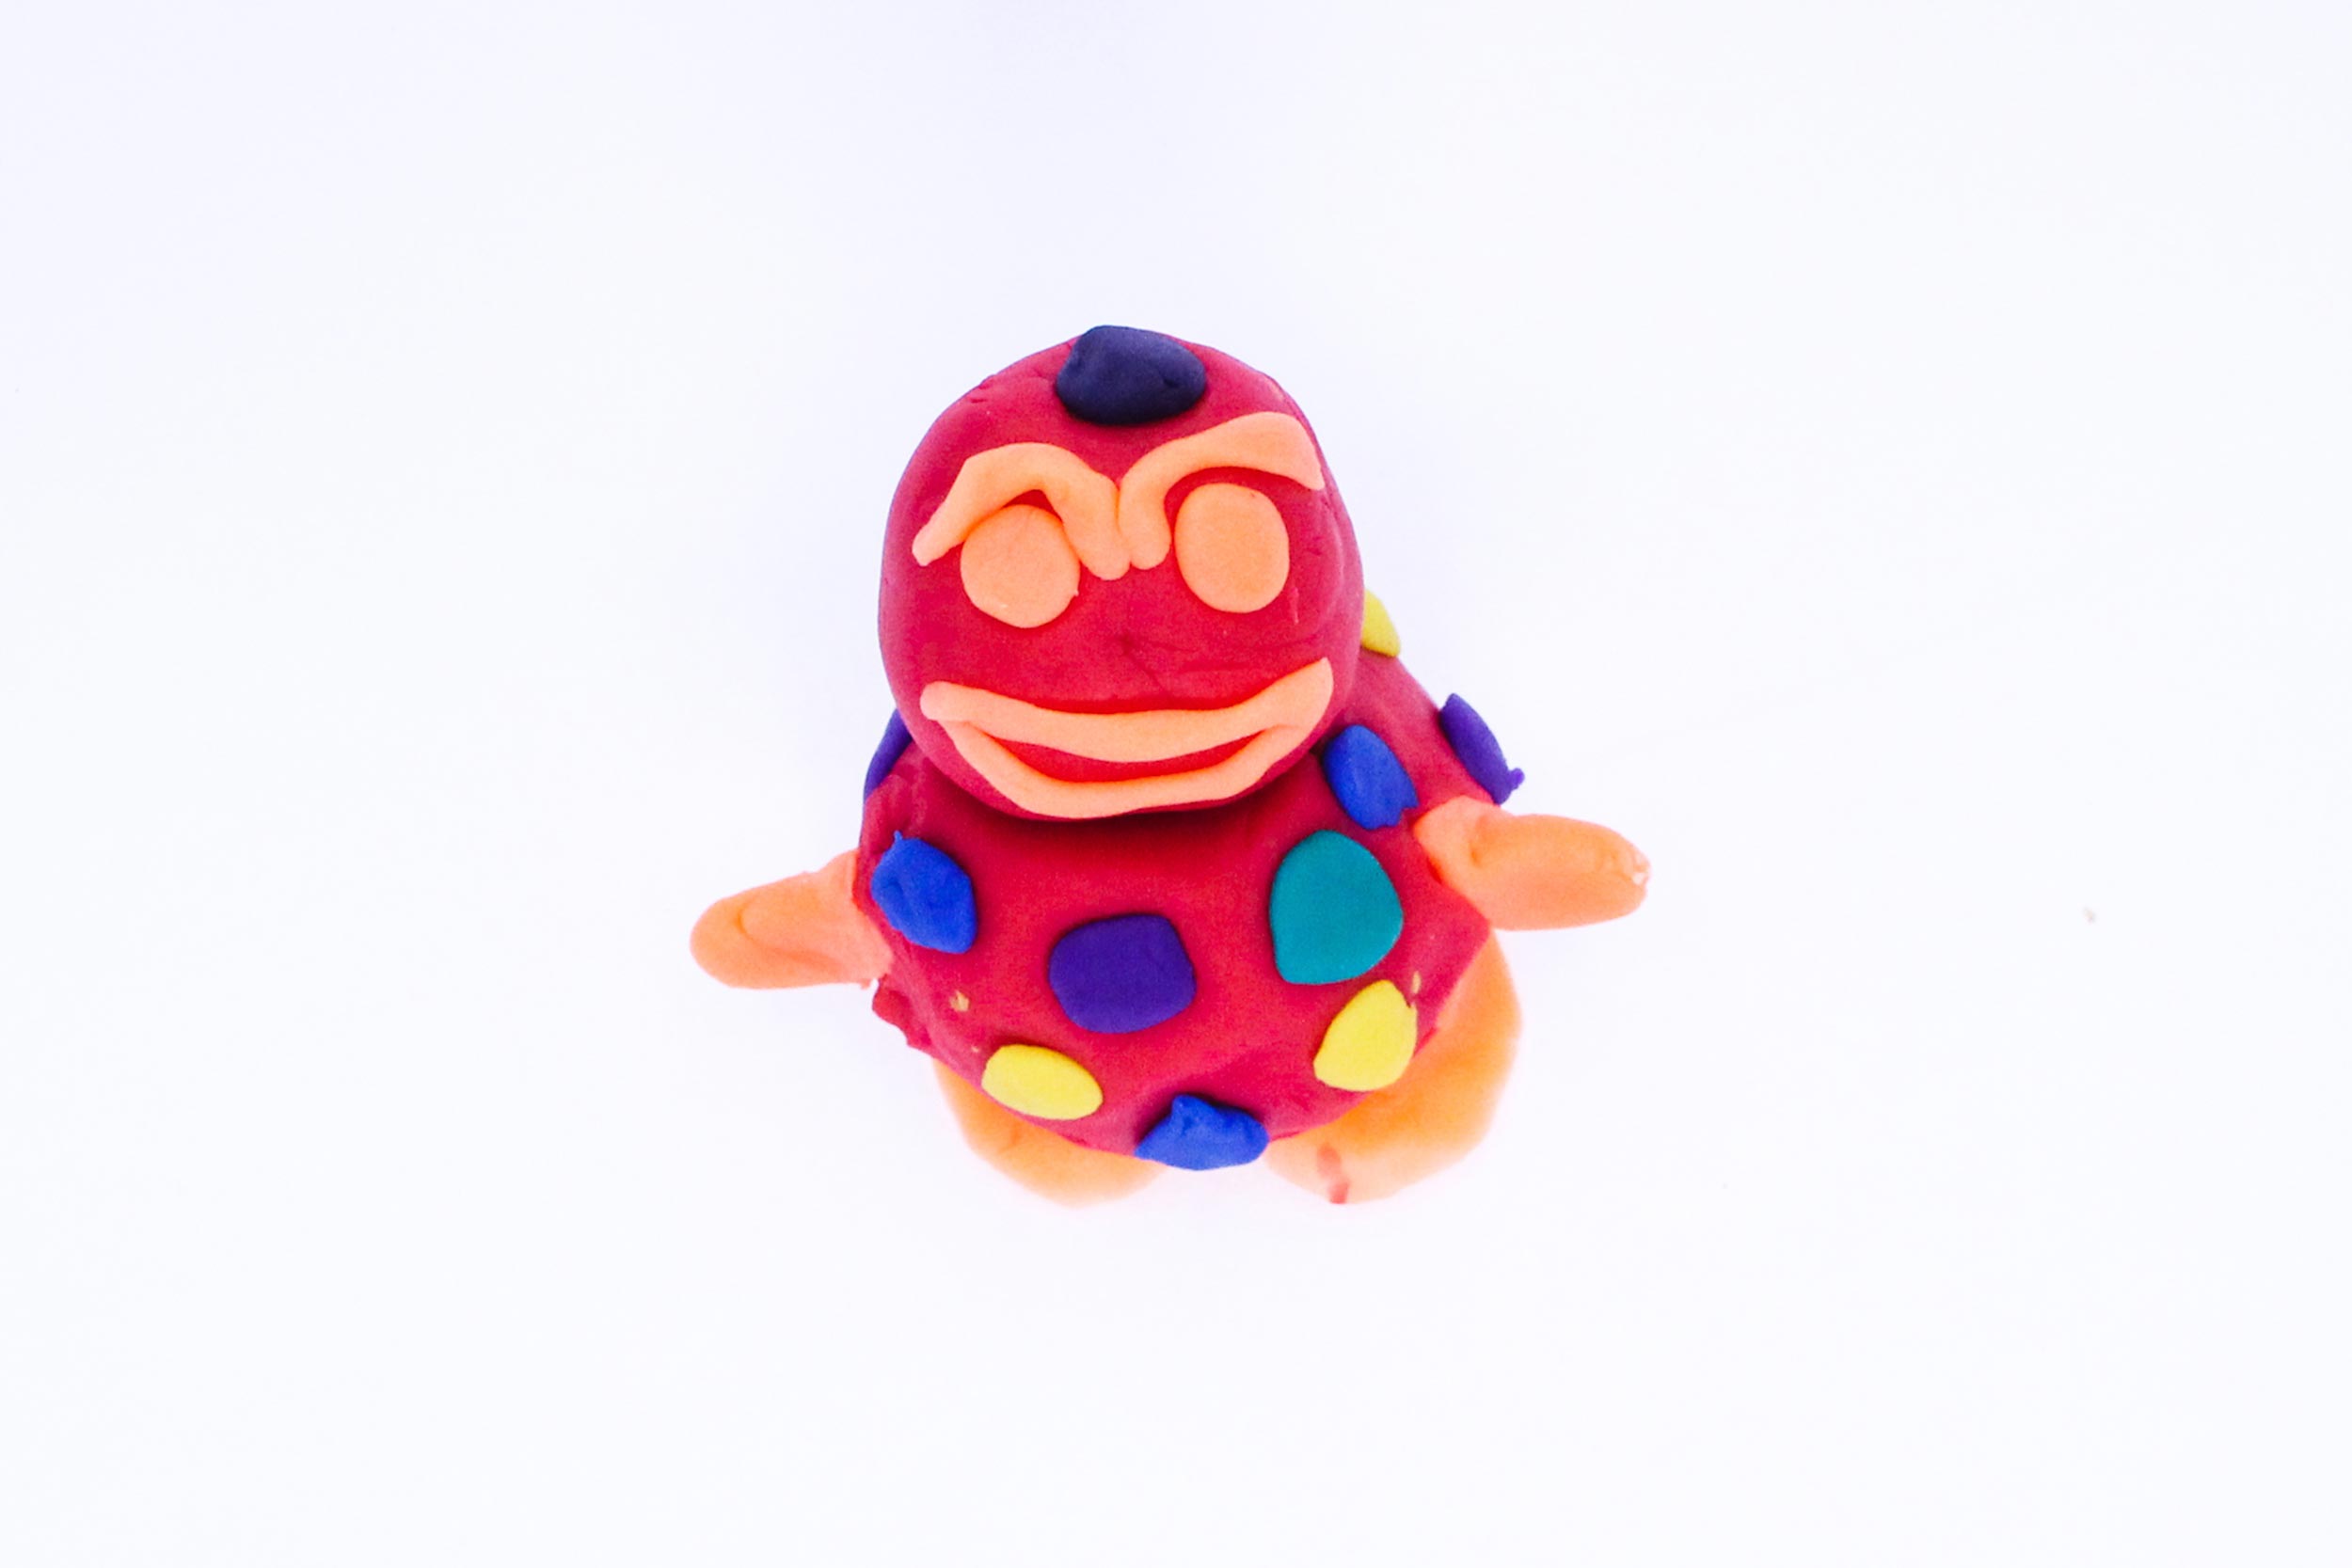 Kitty Bear is a red and purple play-dough sculpture that features whiskers and a suit.